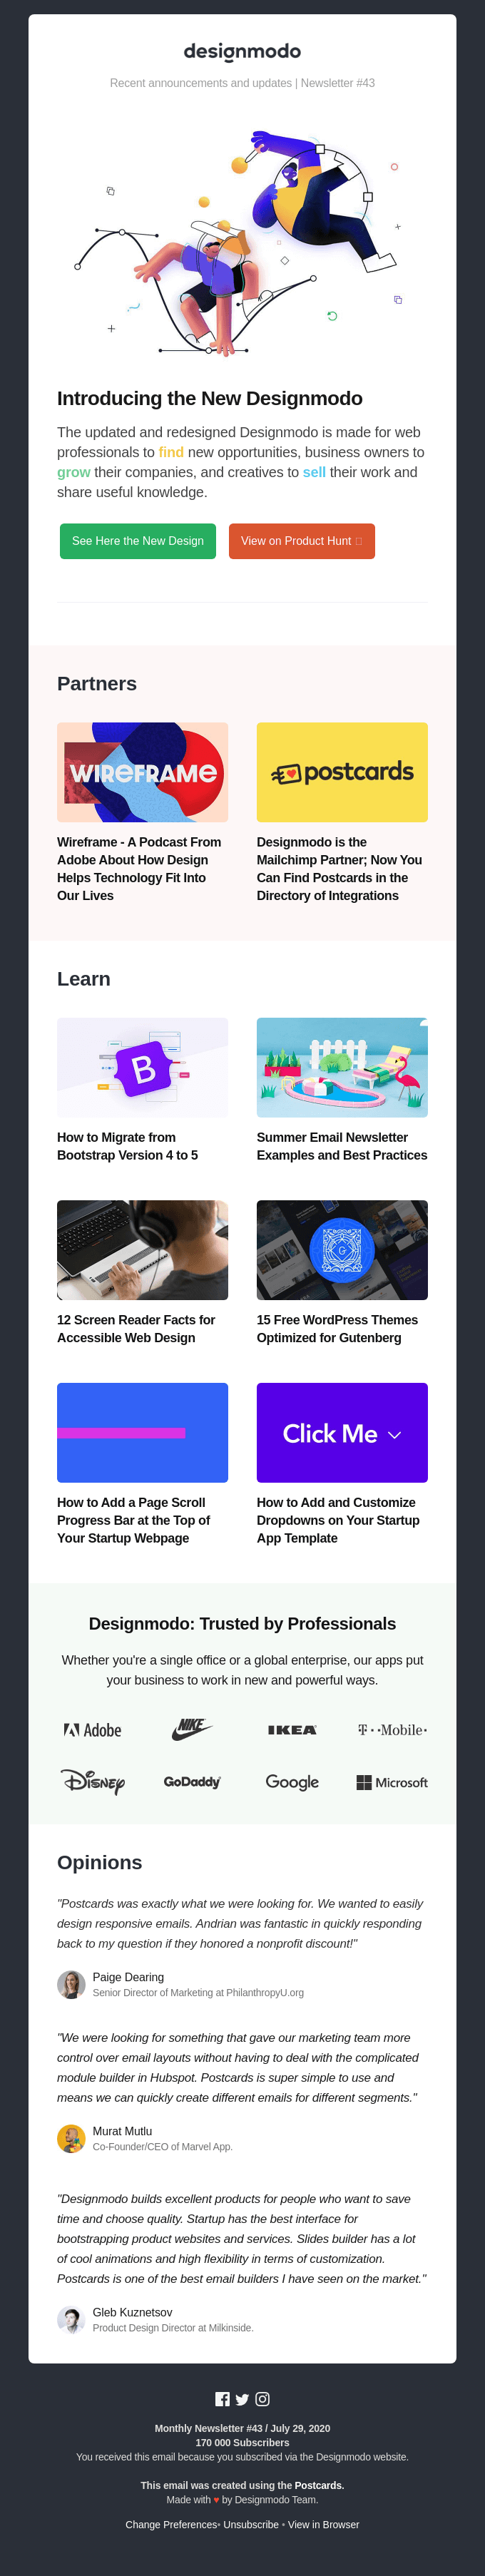 Introducing the New Designmodo, Adobe Podcast, Mailchimp Partners, Summer Emails, Bootstrap 5